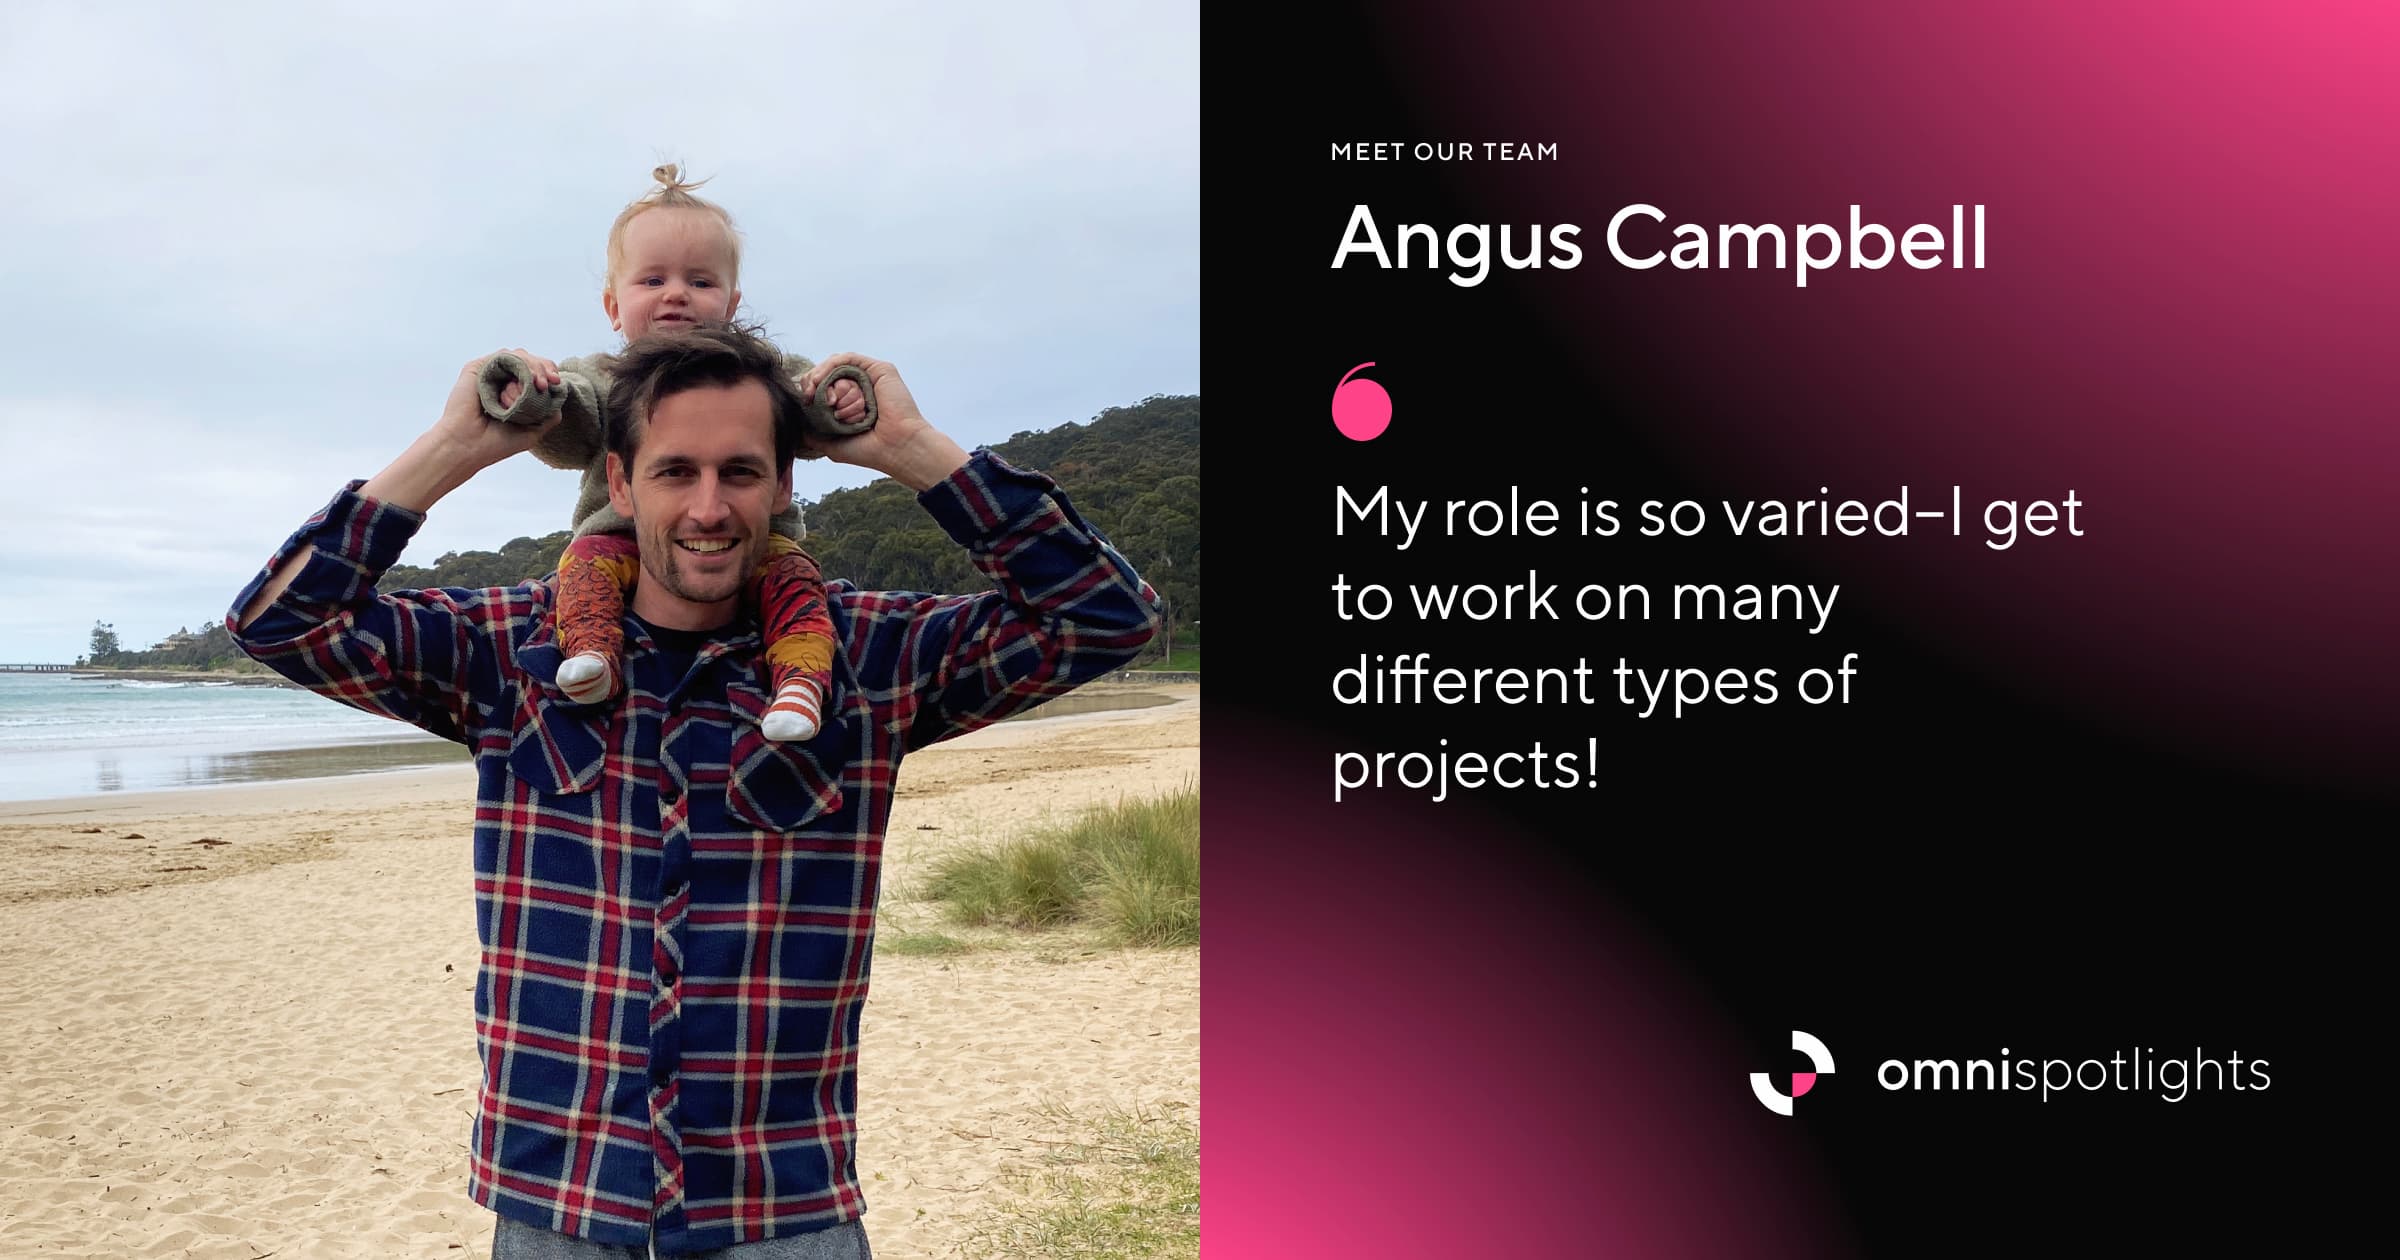 Photo of Angus holding his daugher on his shoulders at a beach. Next to the photo is his name and a quote reading: “My role is so varied–I get to work on many different types of projects!”